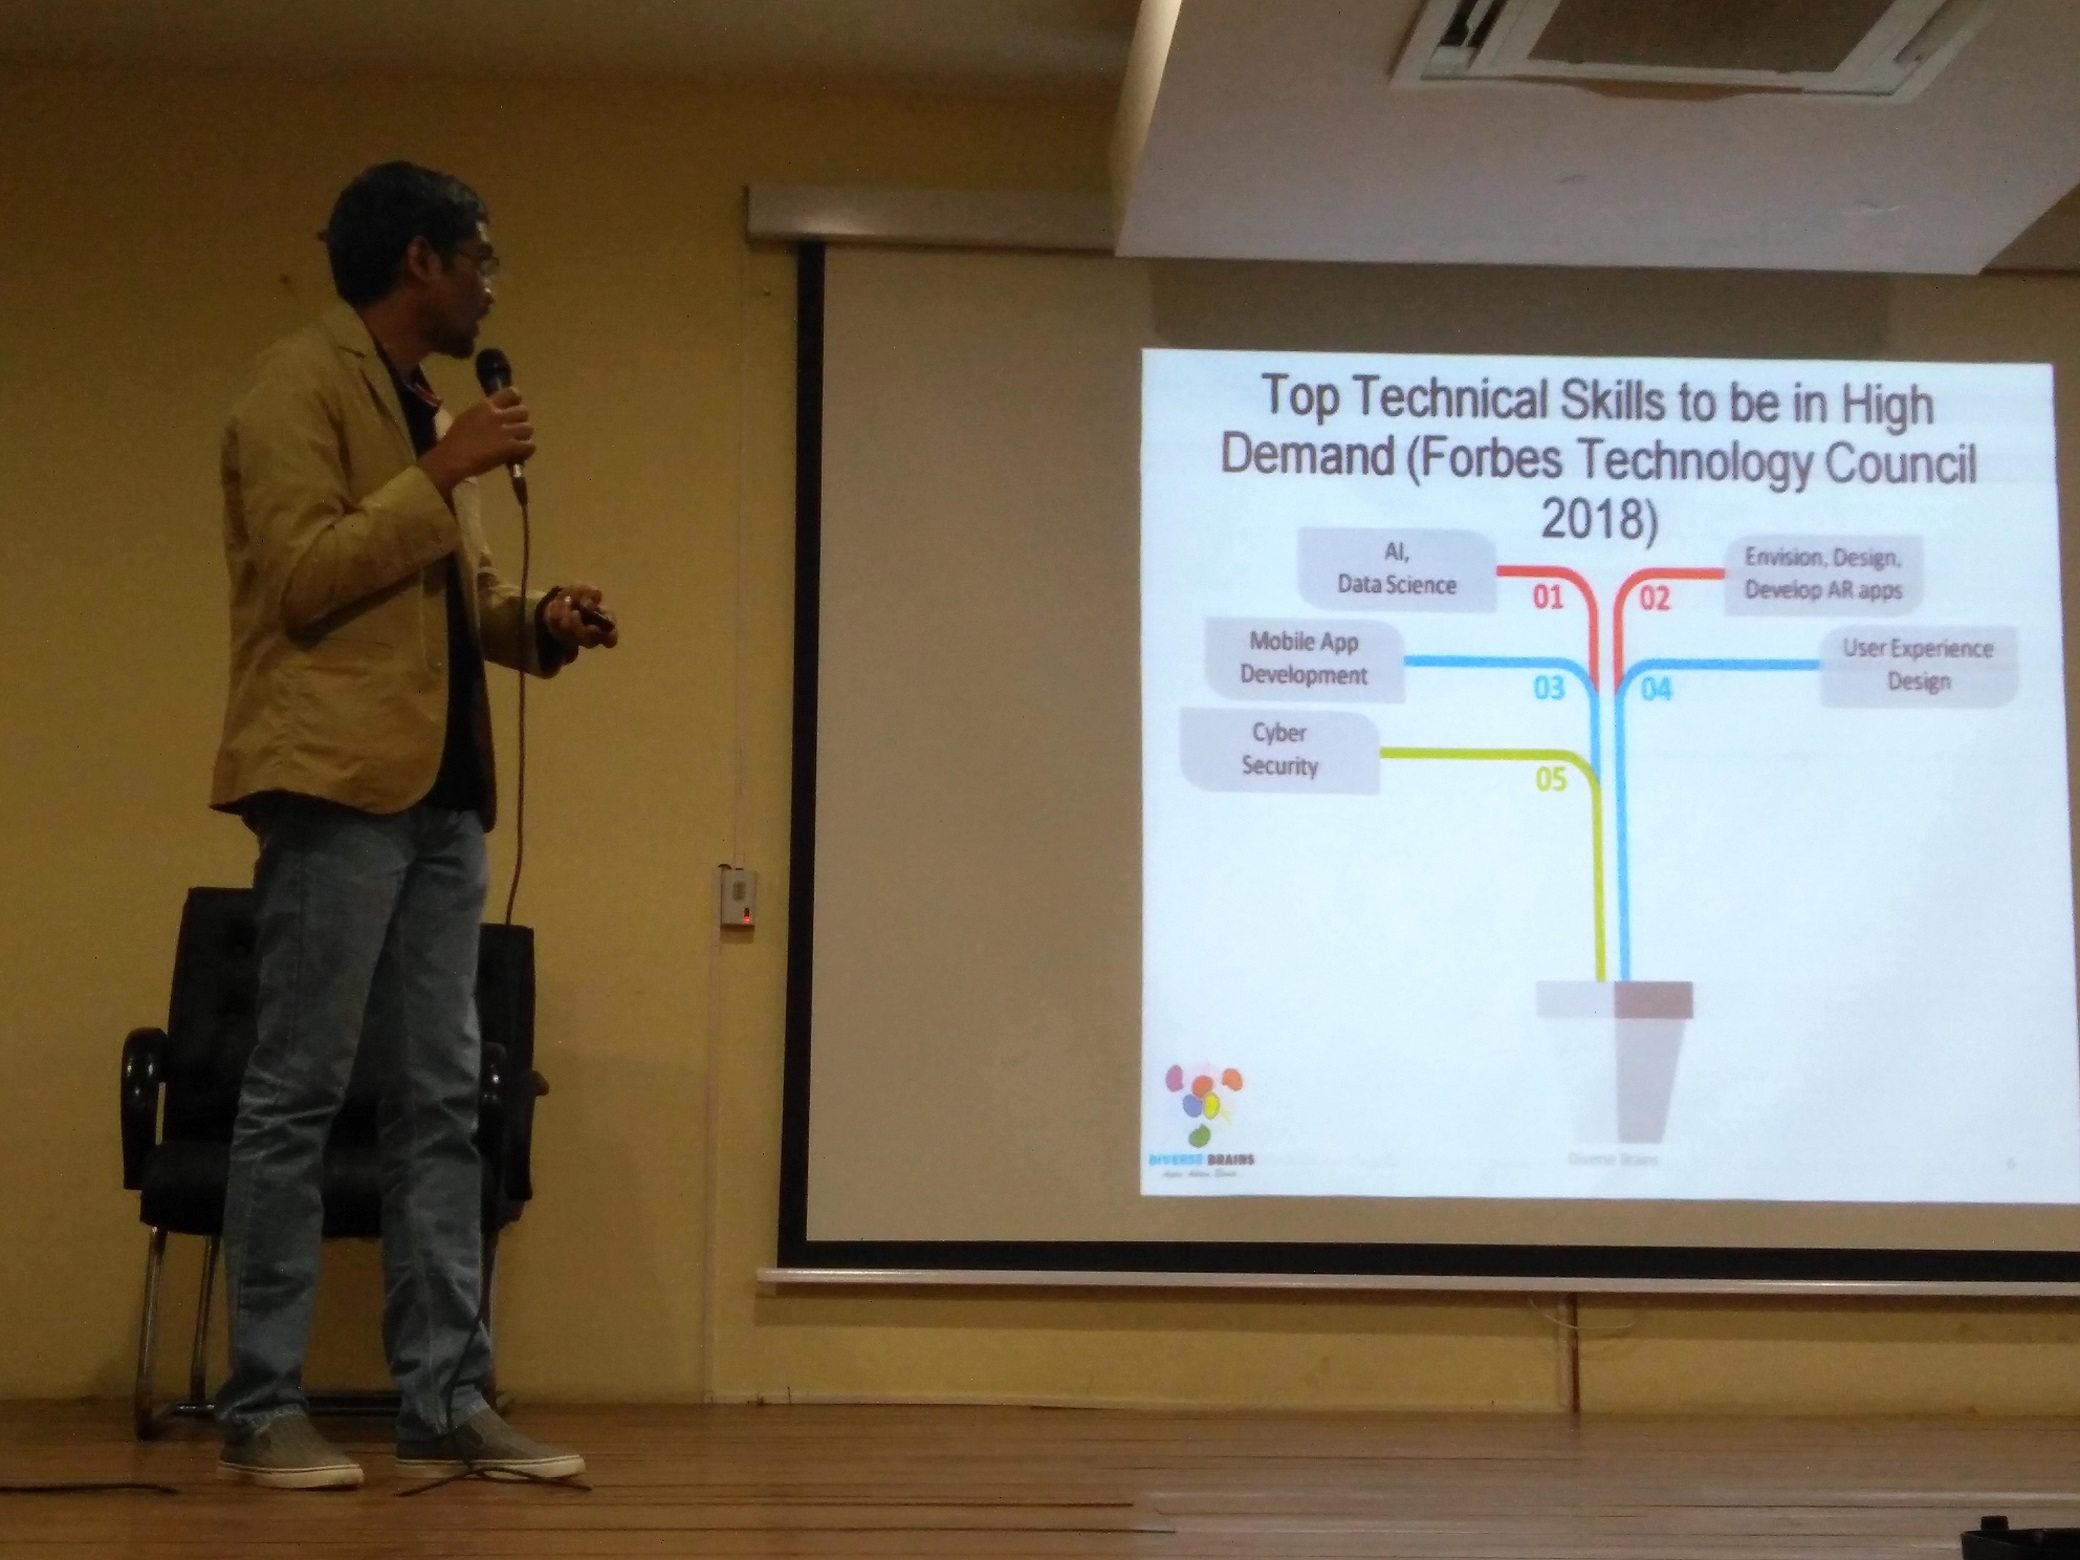 Ananth Sivagnanam sharing about Top Technical Skills in High Demand as listed by Forbes Technology Council 2018